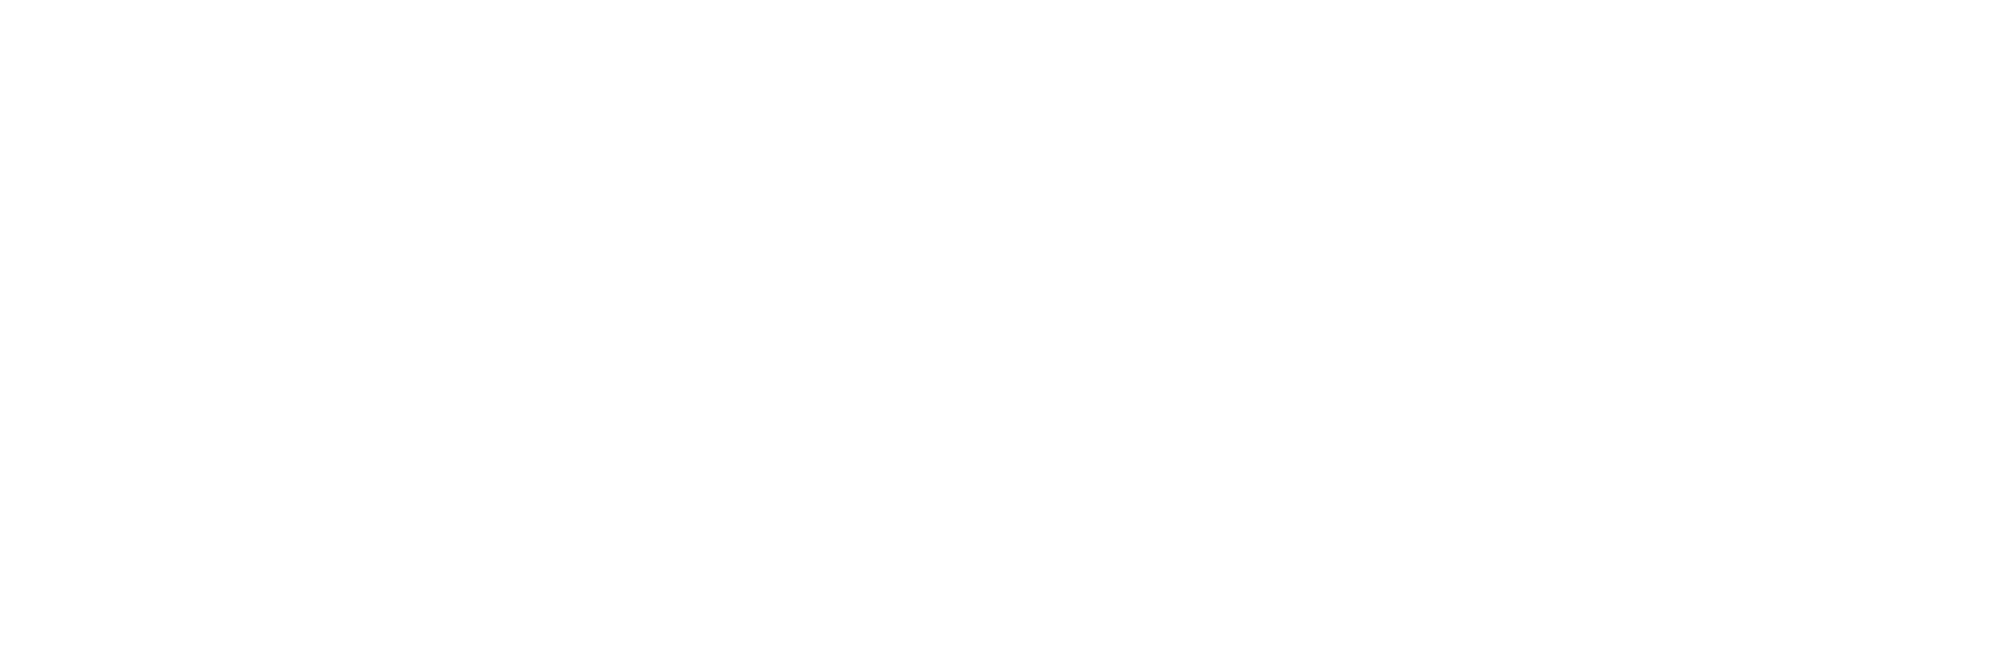 2nd Union Confidential